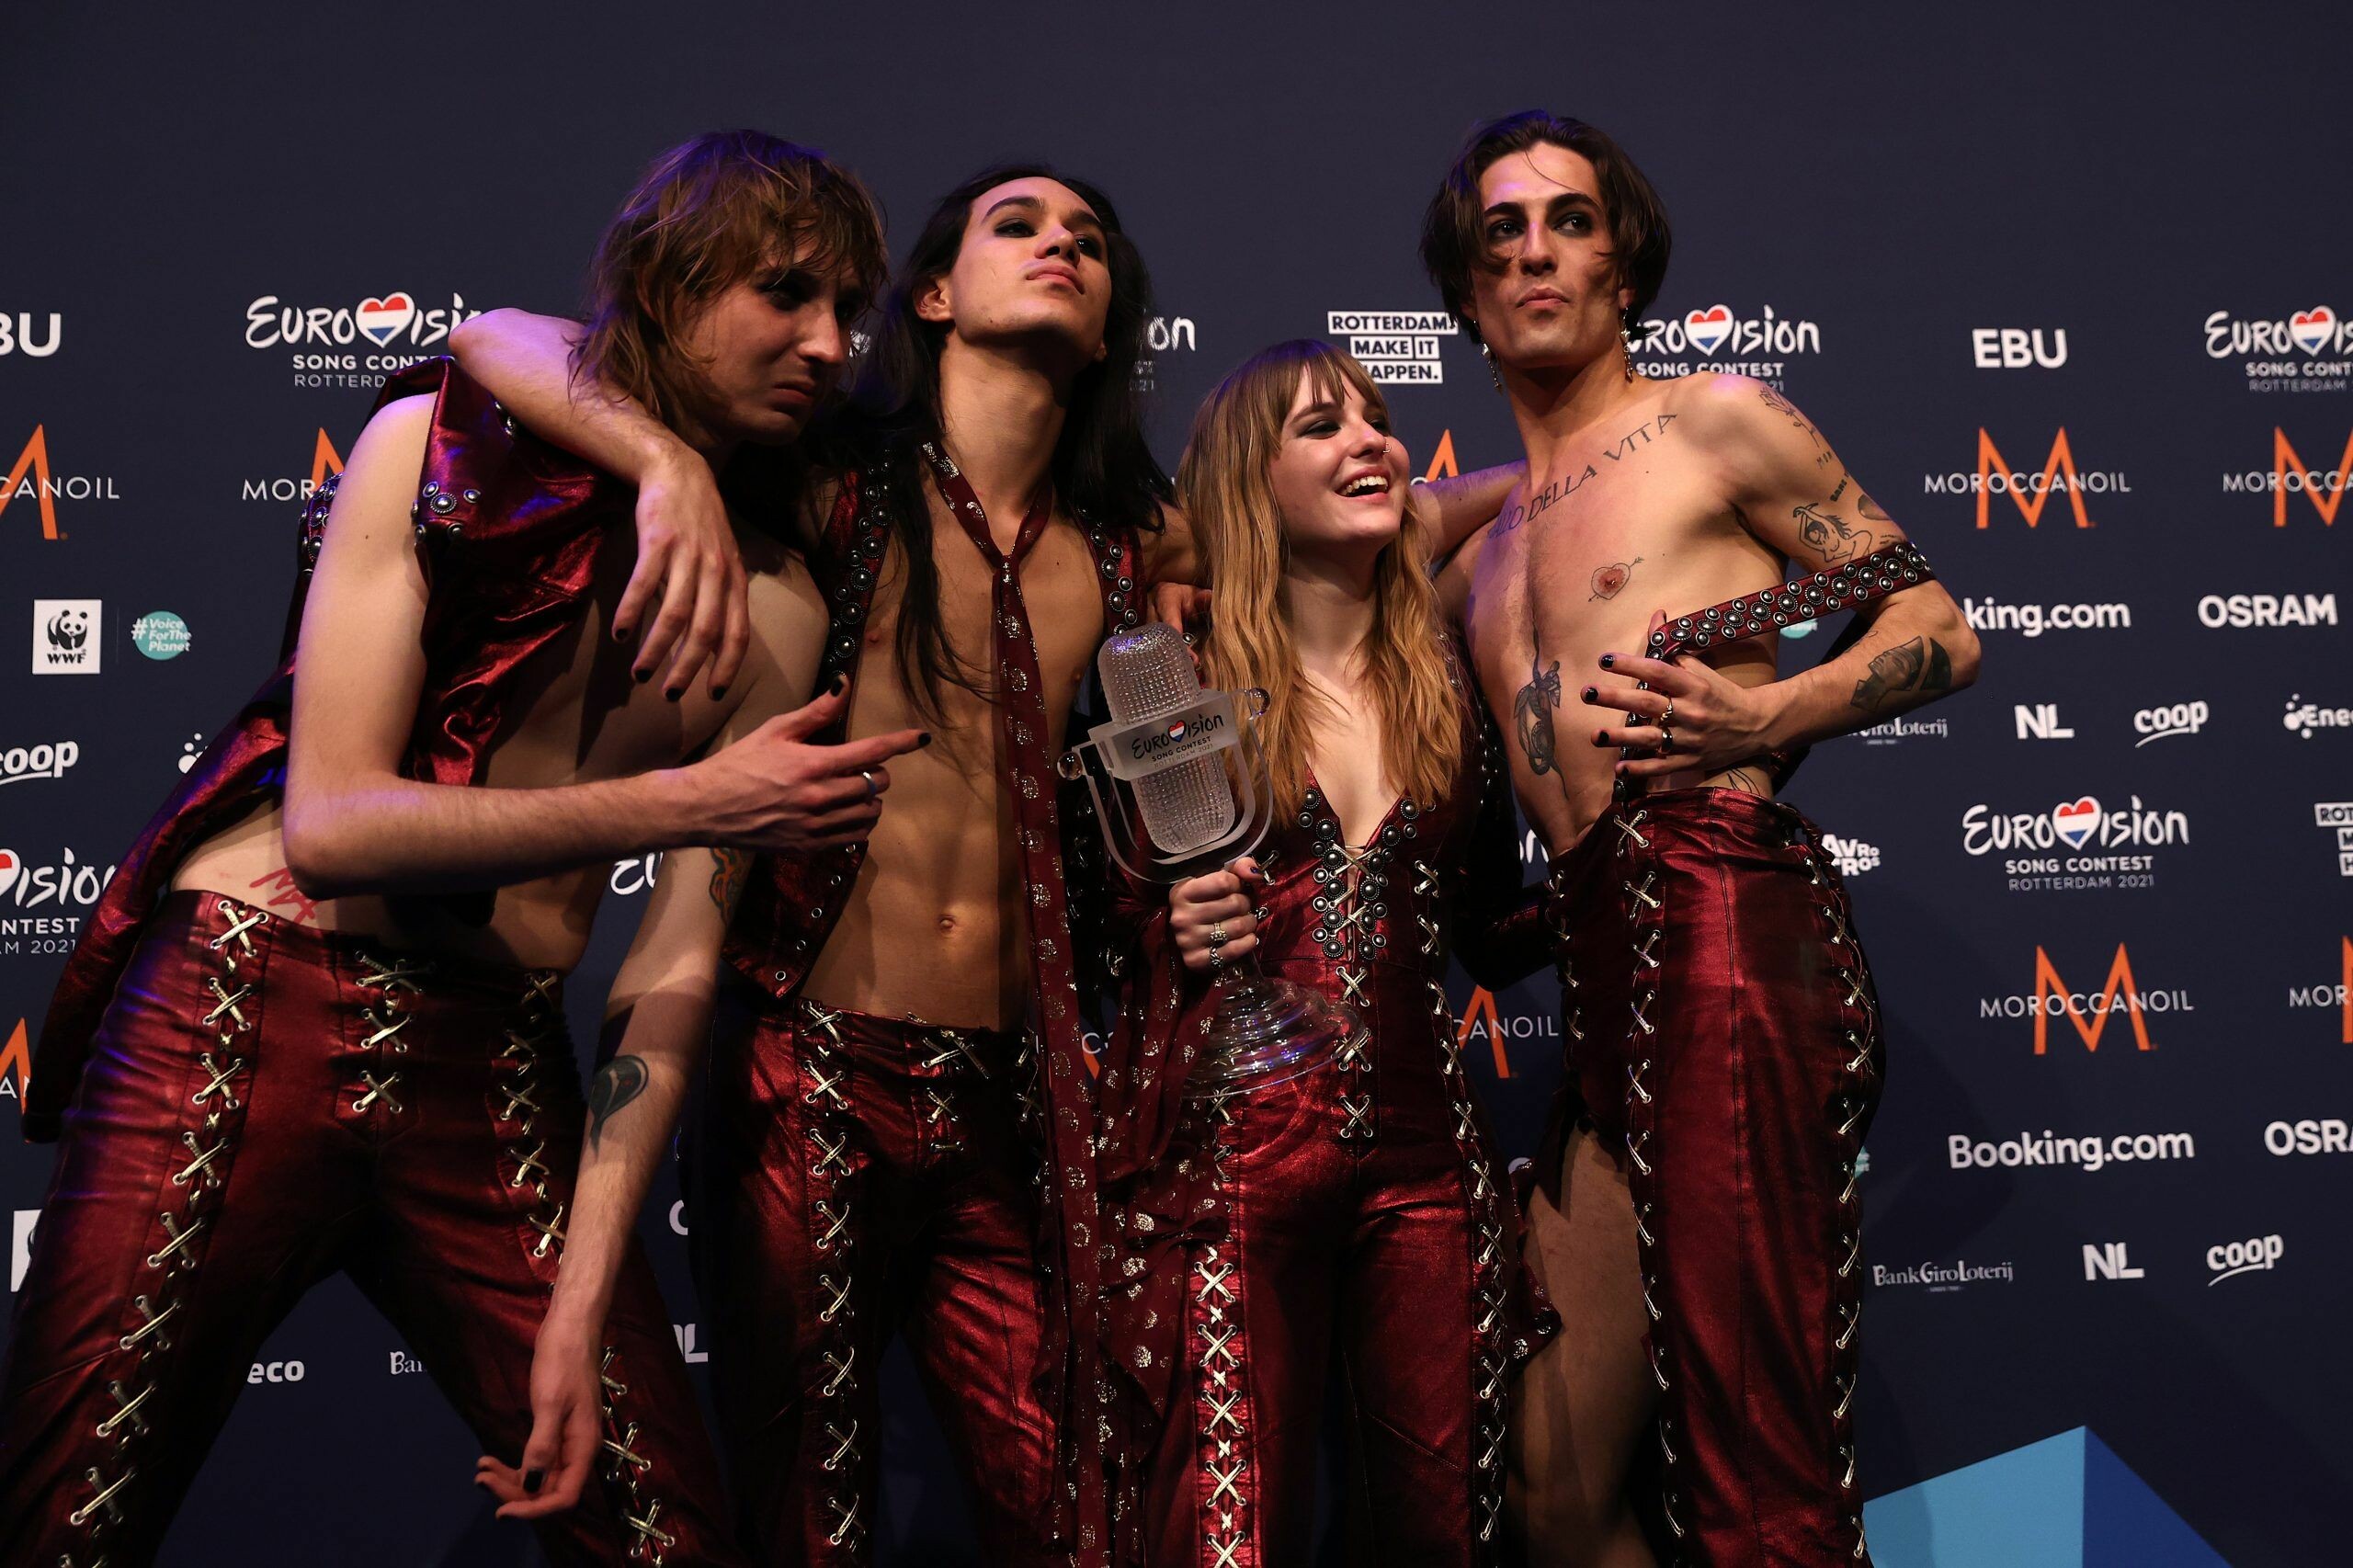 Maneskin: The band is composed of Damiano David, Victoria De Angelis, Thomas Raggi, and Ethan Torchio. 2560x1710 HD Wallpaper.